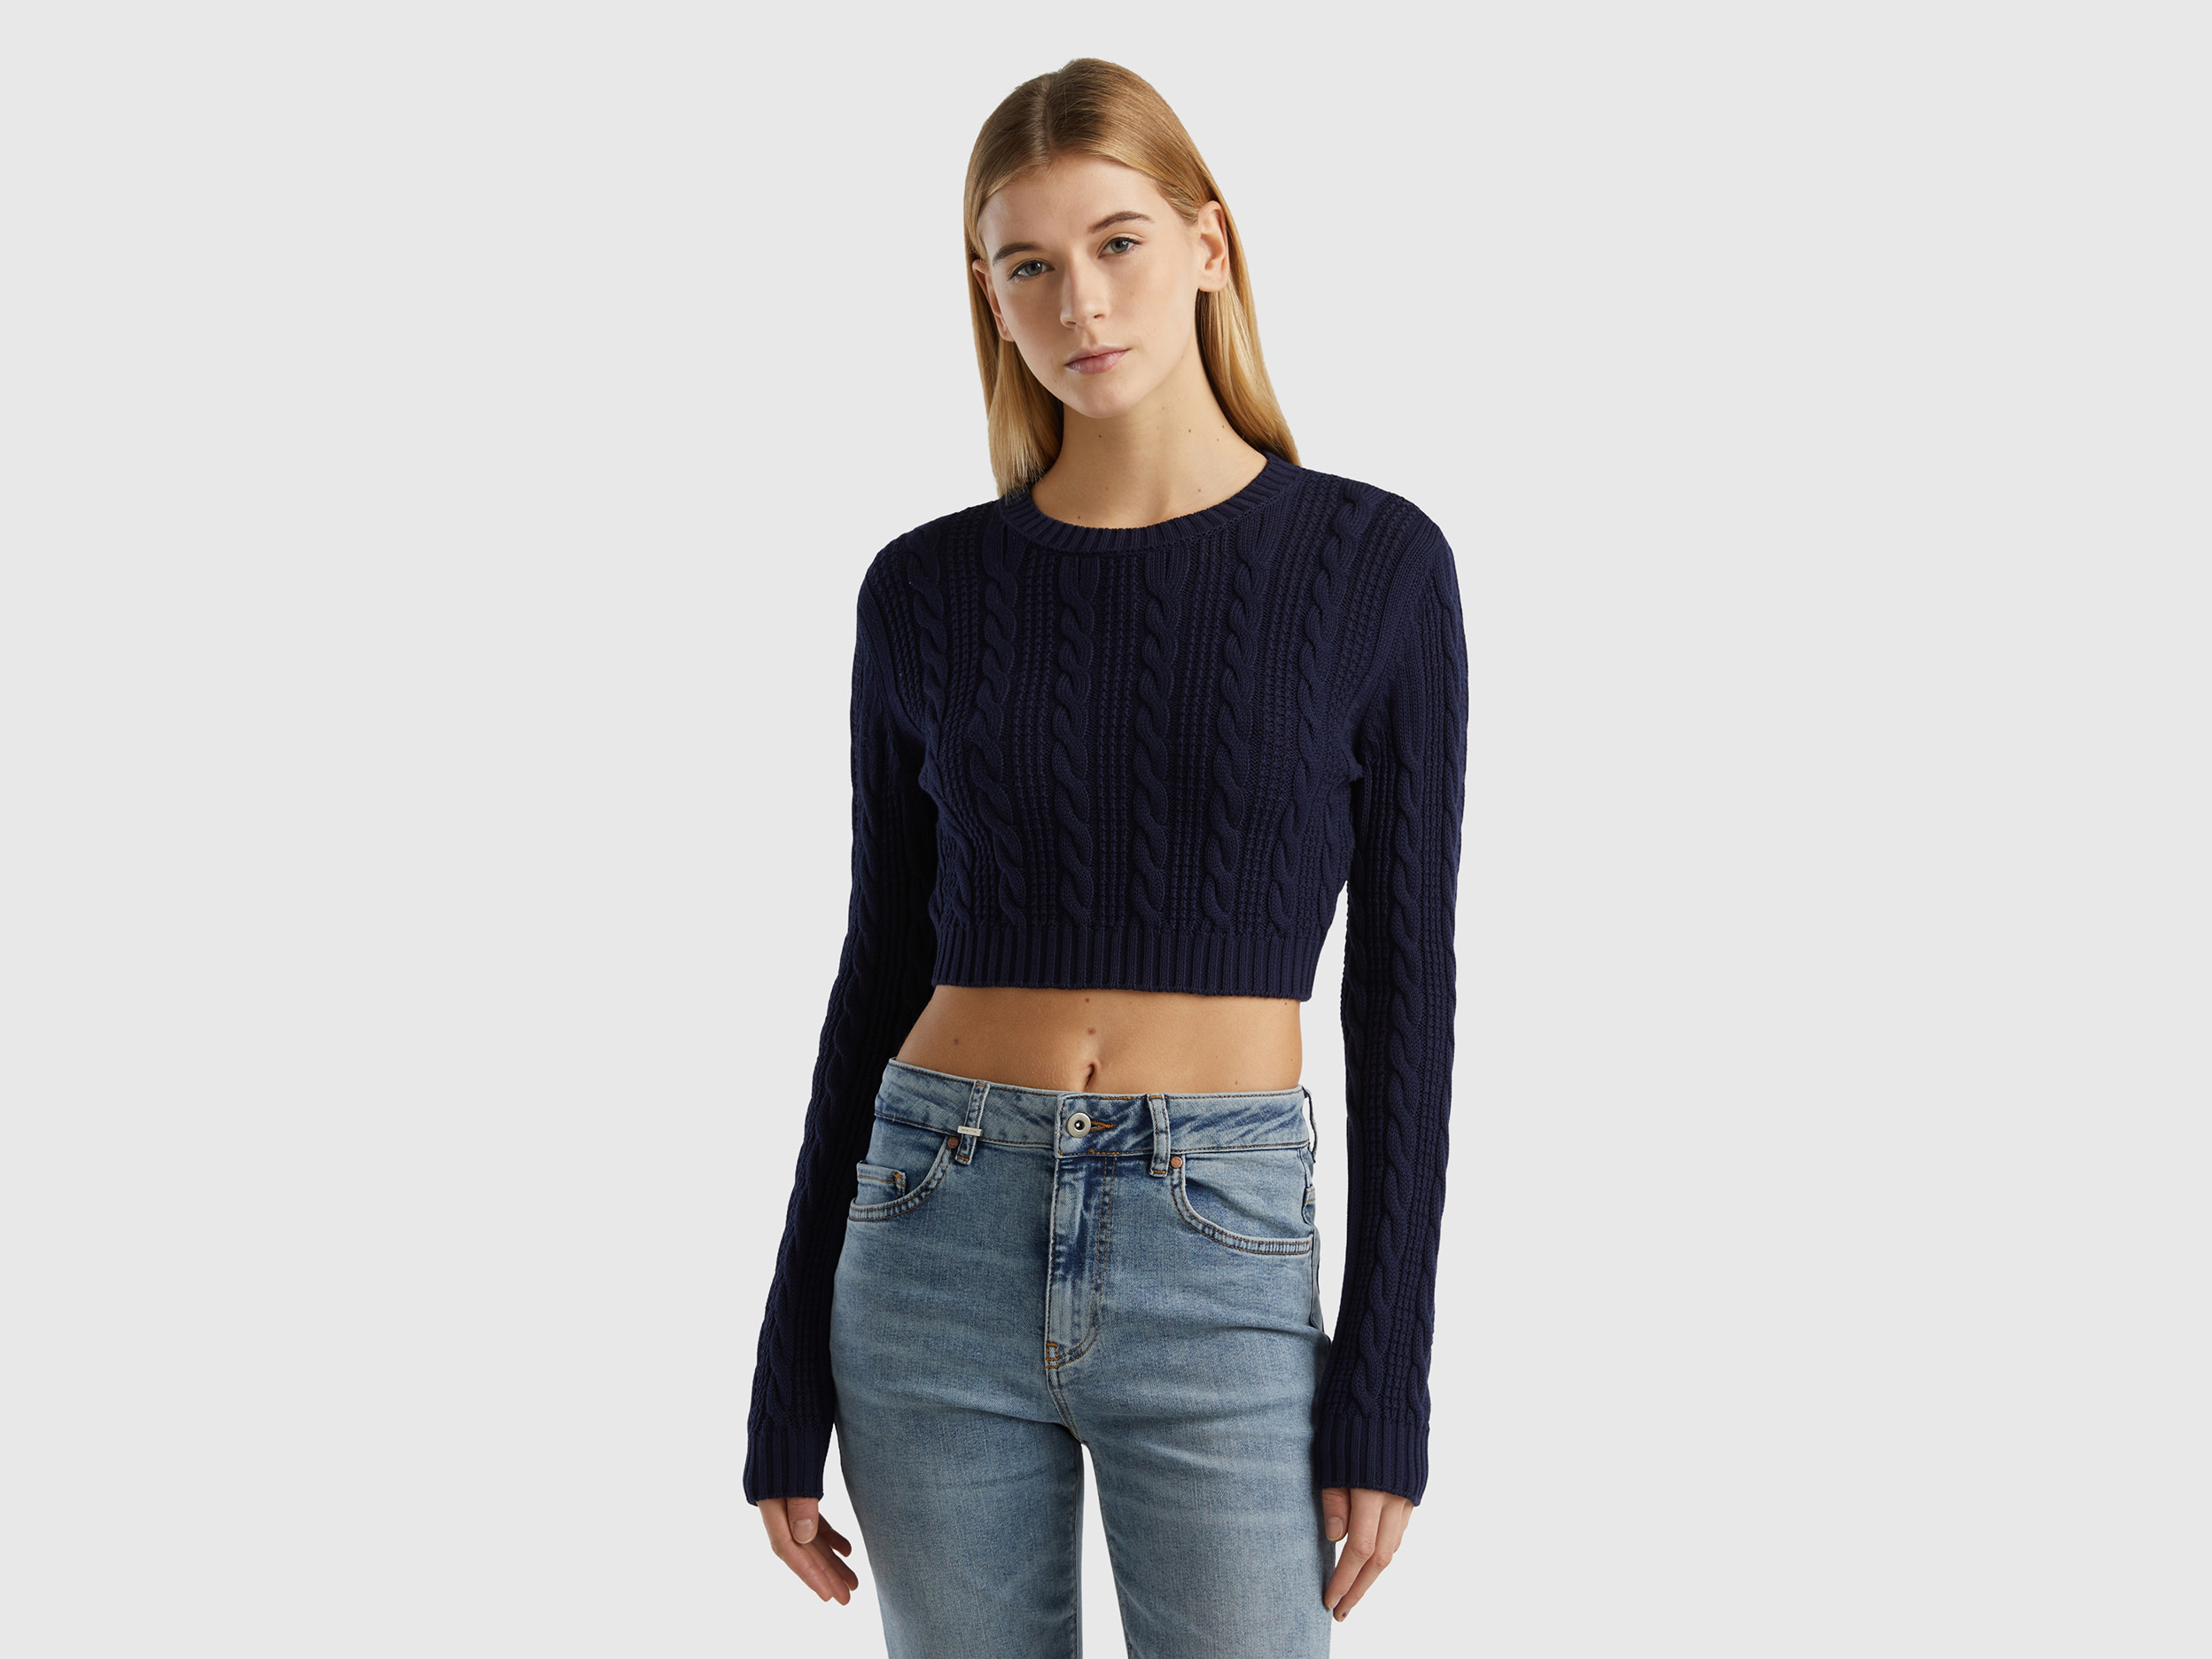 Benetton, Cropped Cable Knit Sweater, size M, Dark Blue, Women